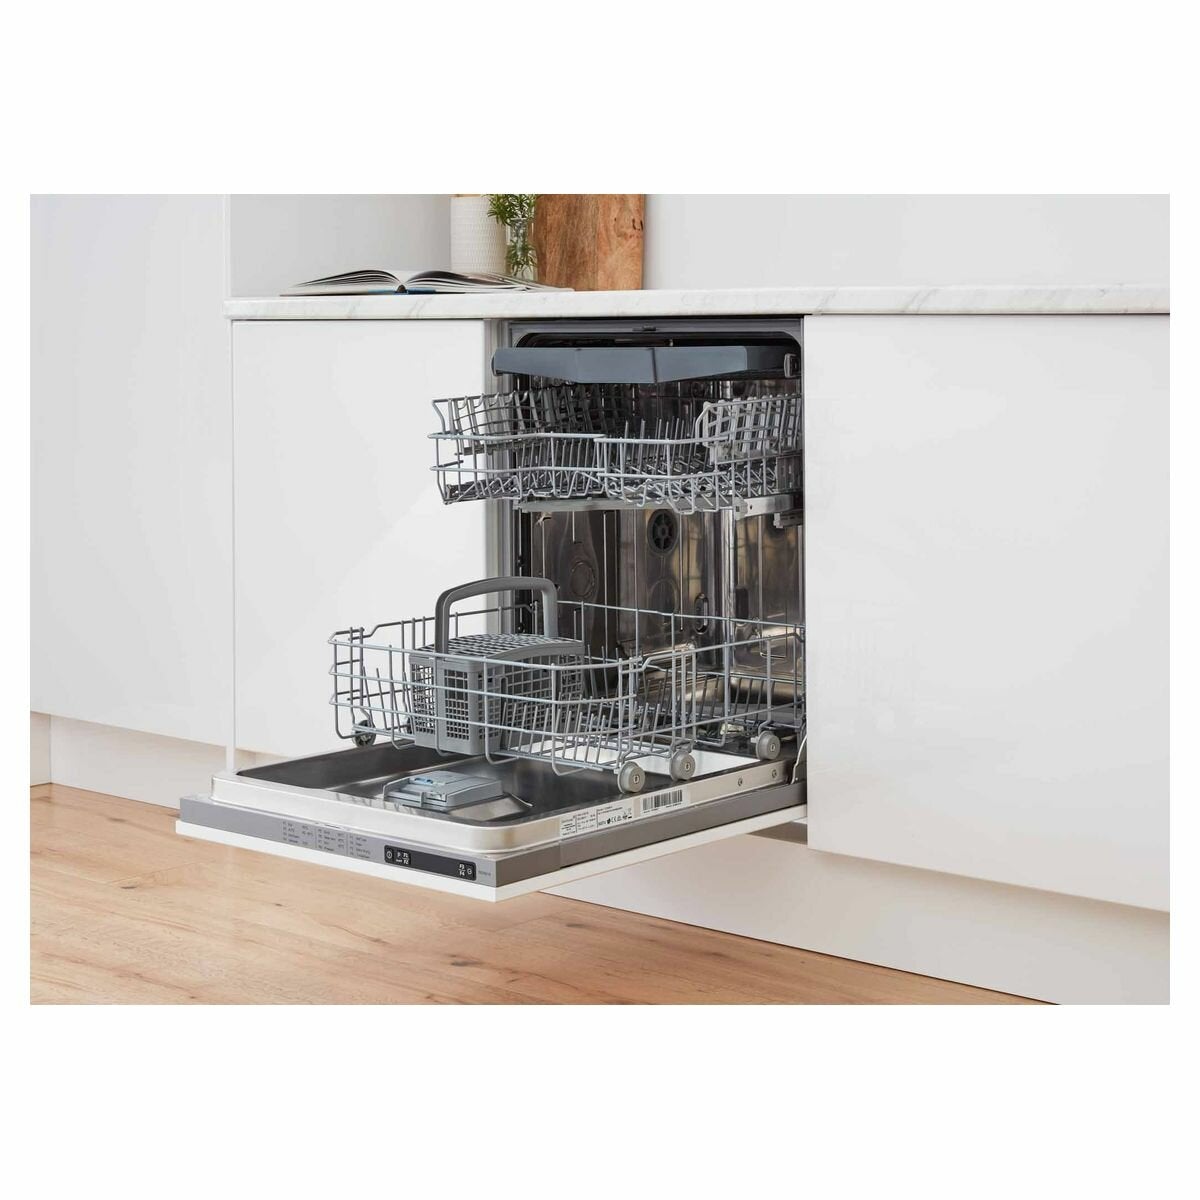 Euromaid FIDWB16 60cm Fully Integrated Dishwasher